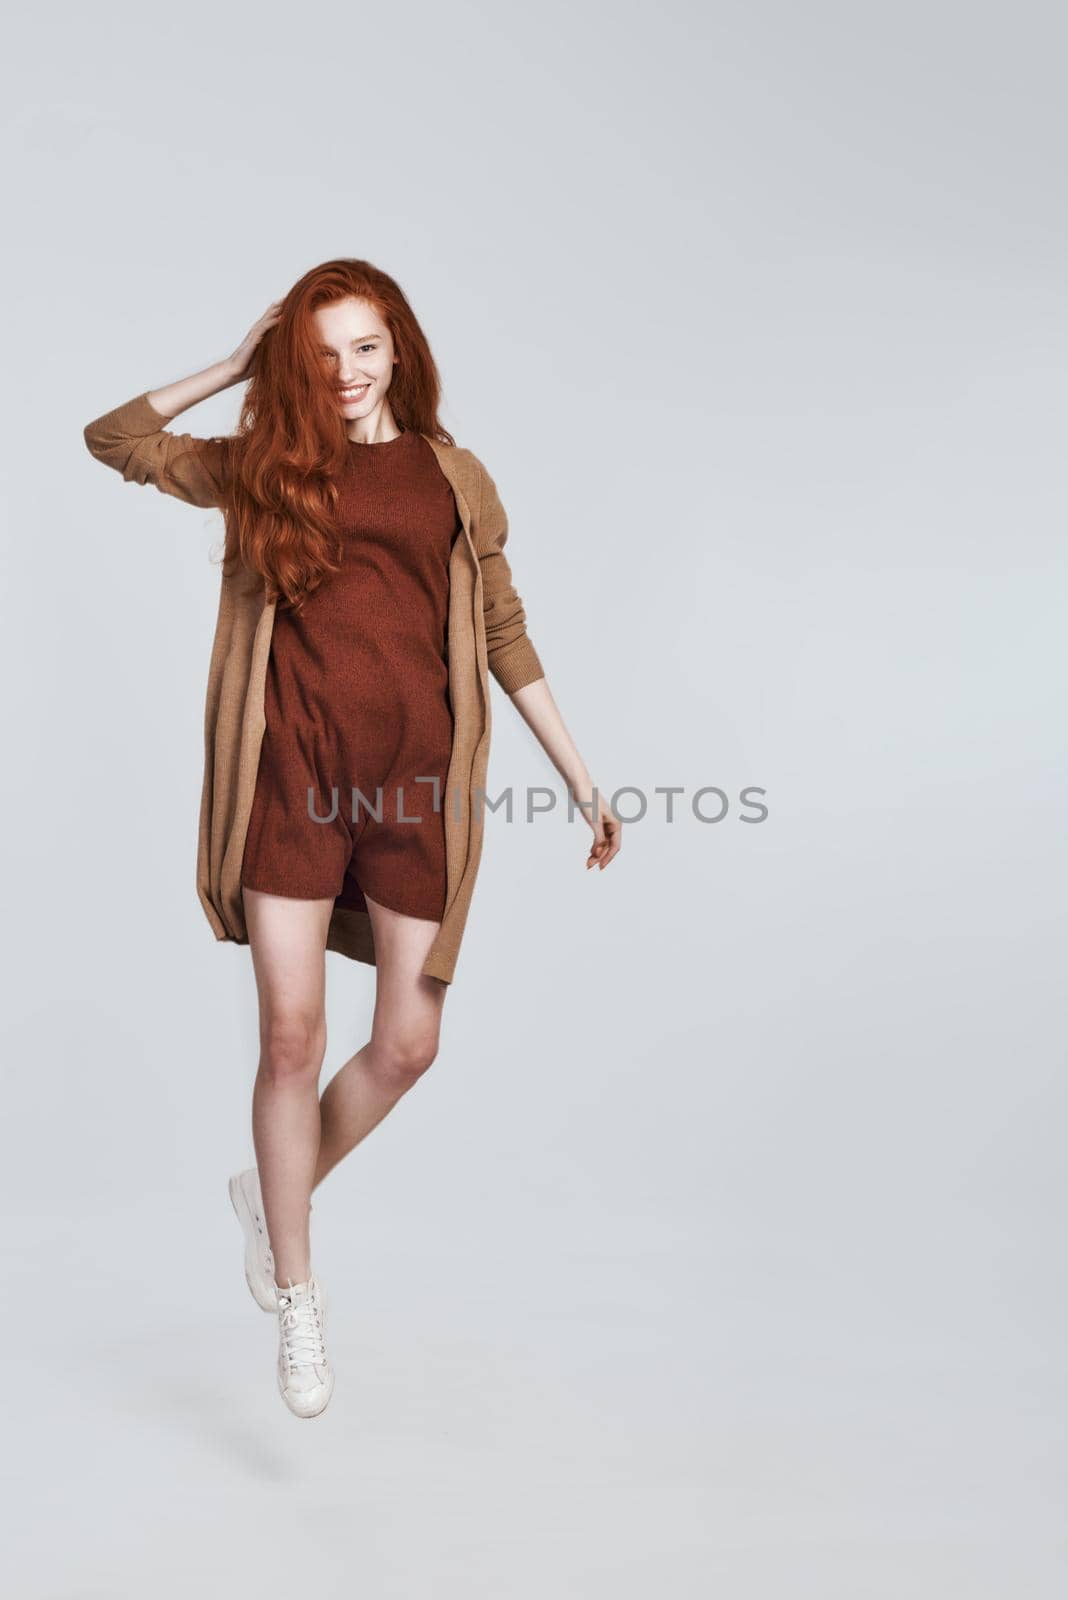 Studio shot of playful young woman with tousled red hair smiling while jumping against grey background. Beauty concept. Happiness